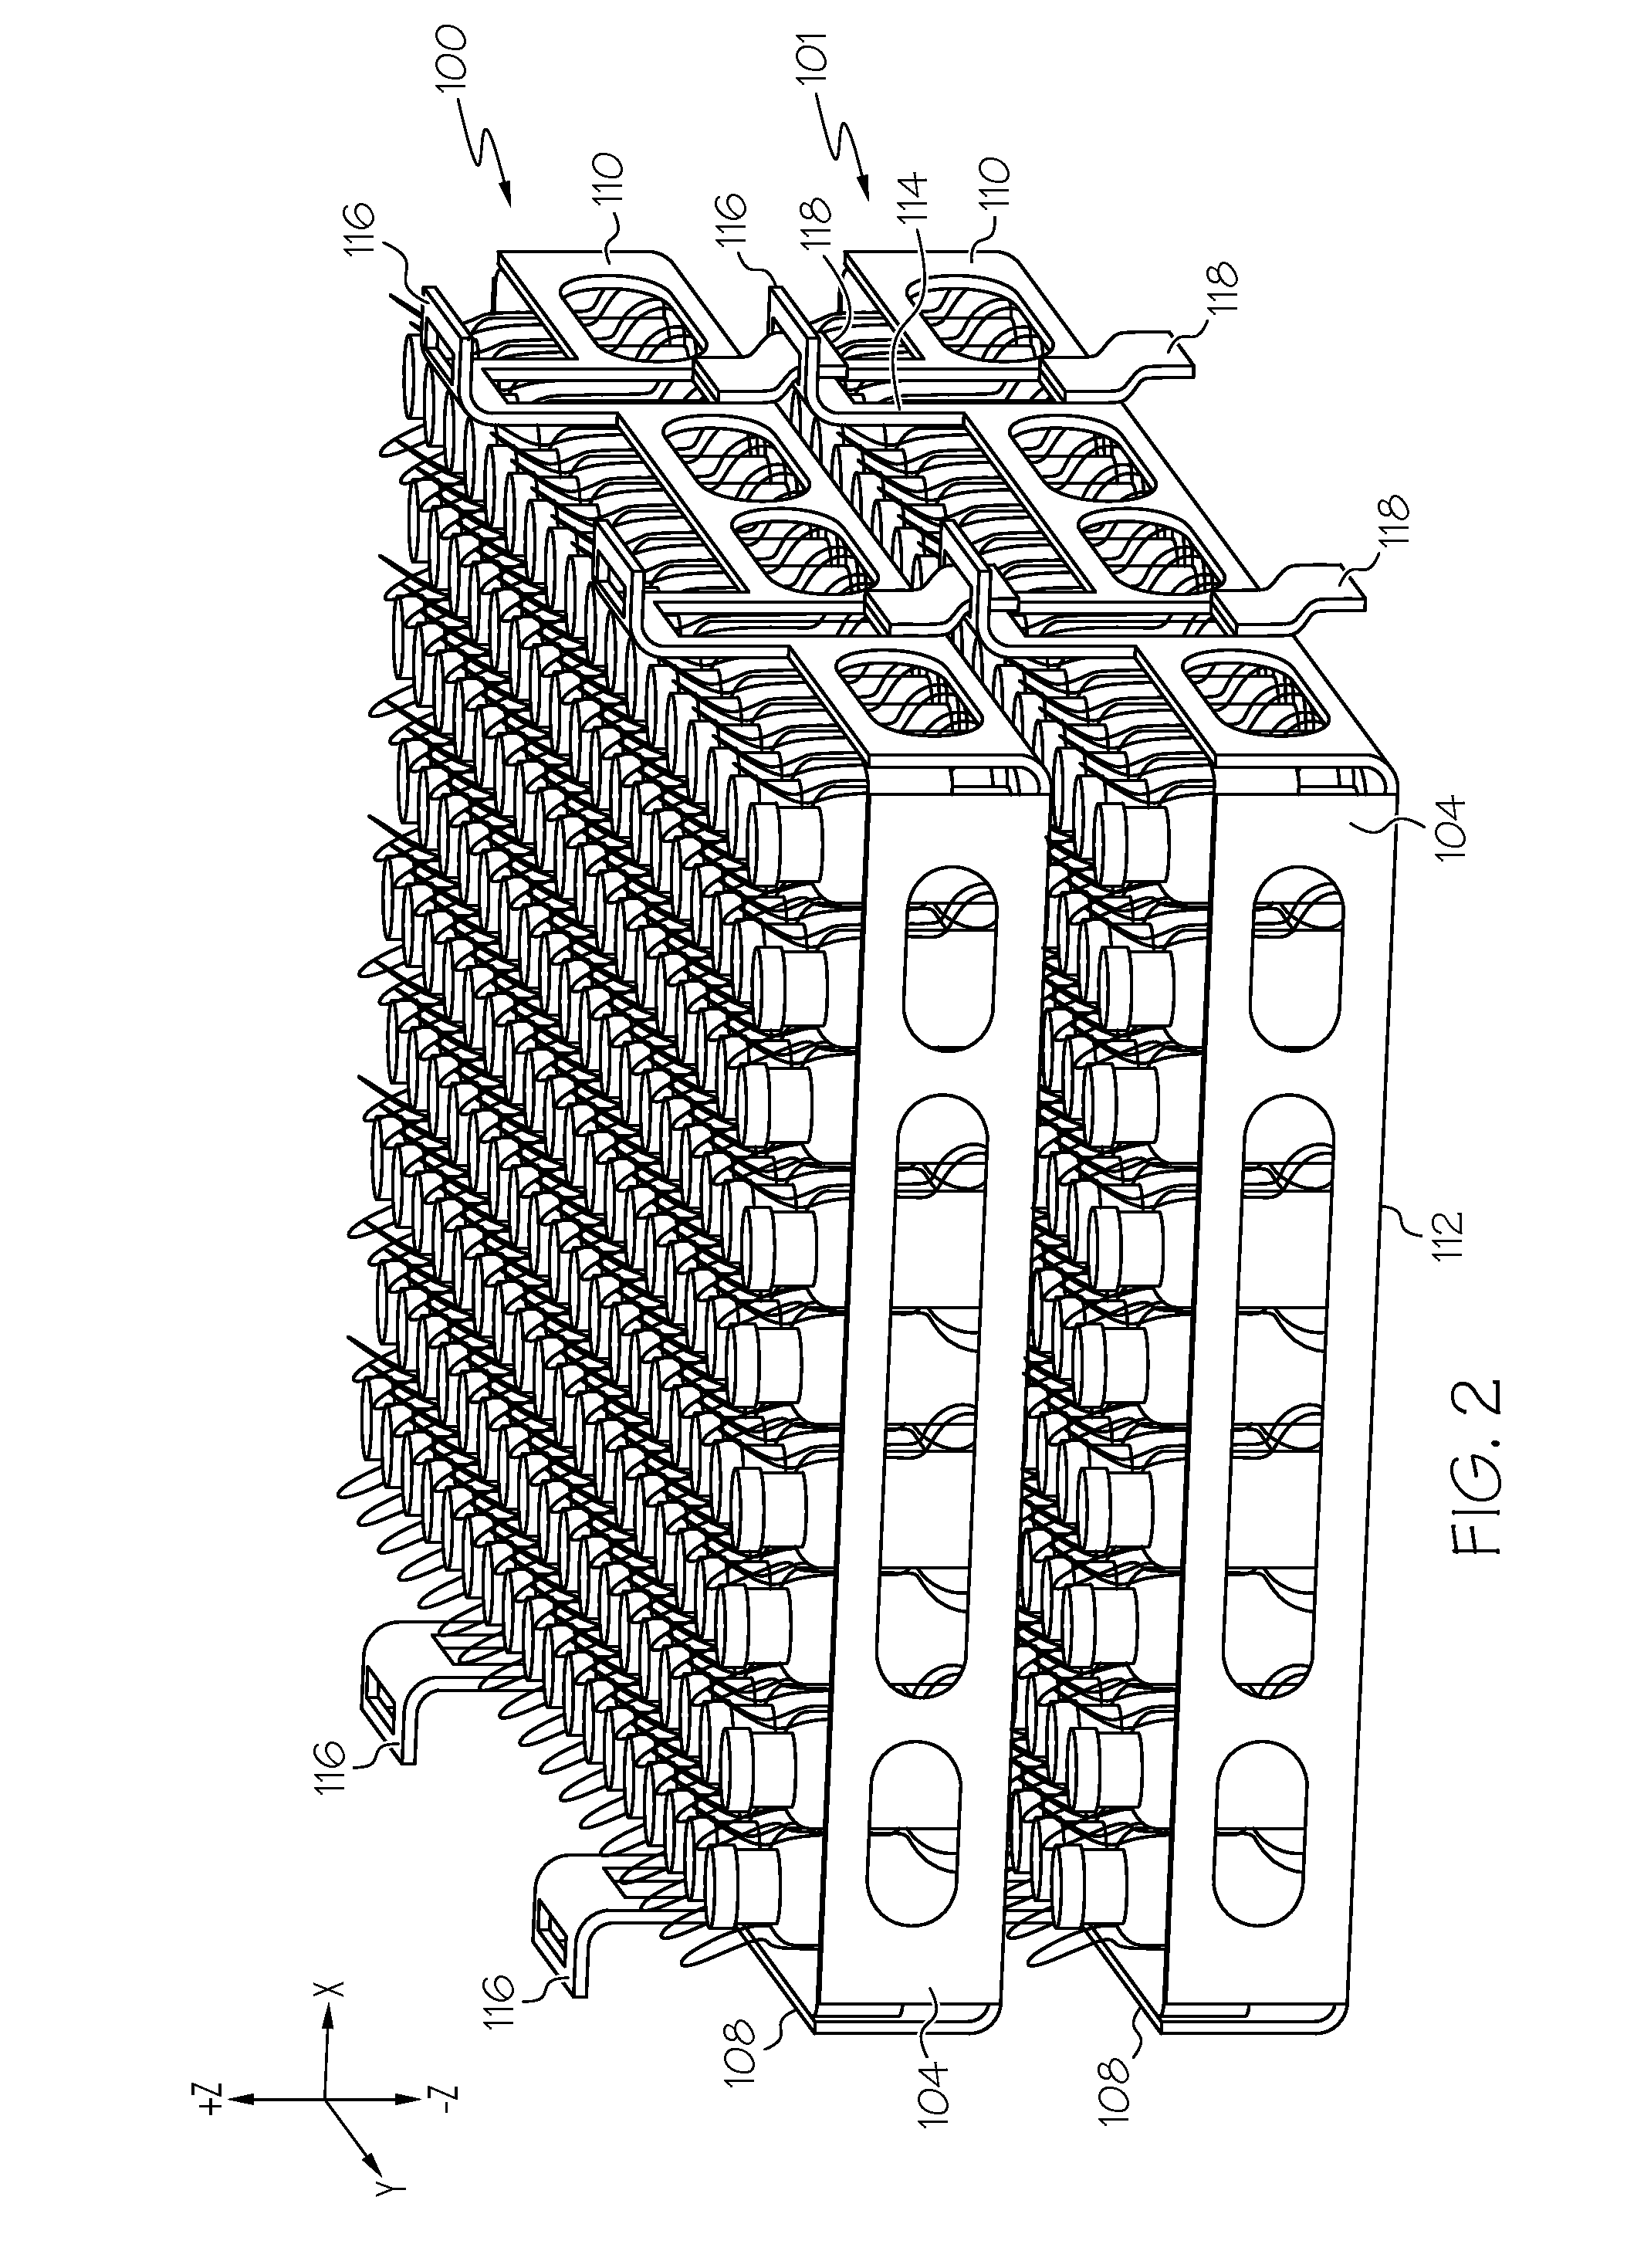 Apparatuses for holding and retaining glass articles